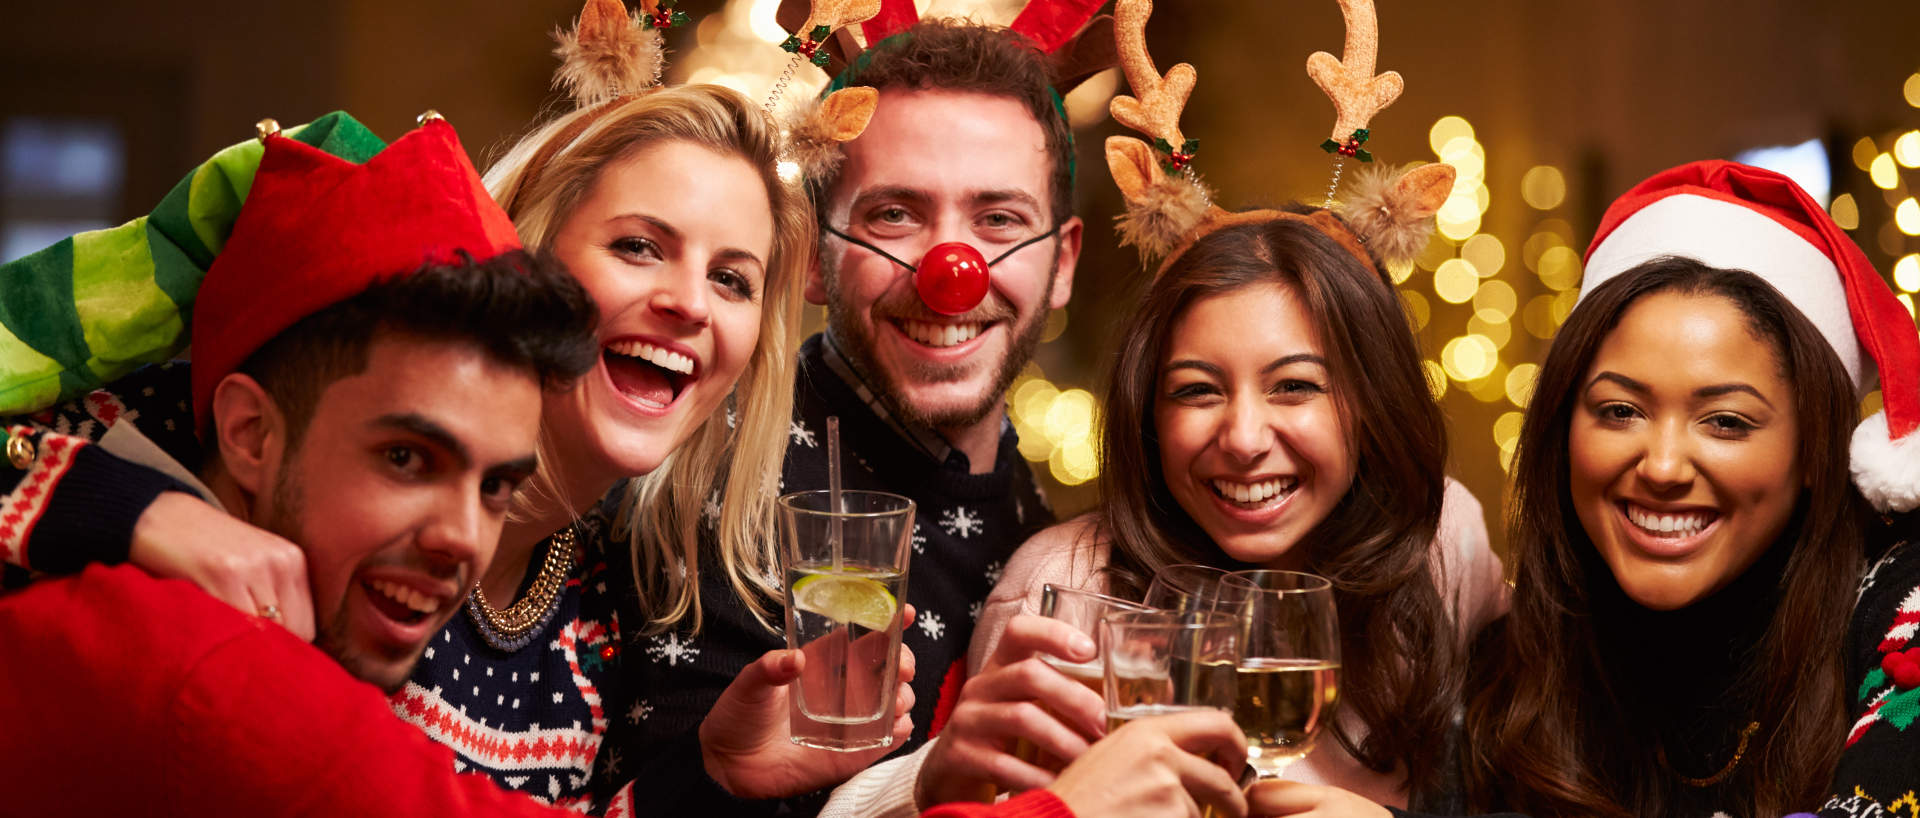 Here are five holiday party ideas that are sure to please your residents